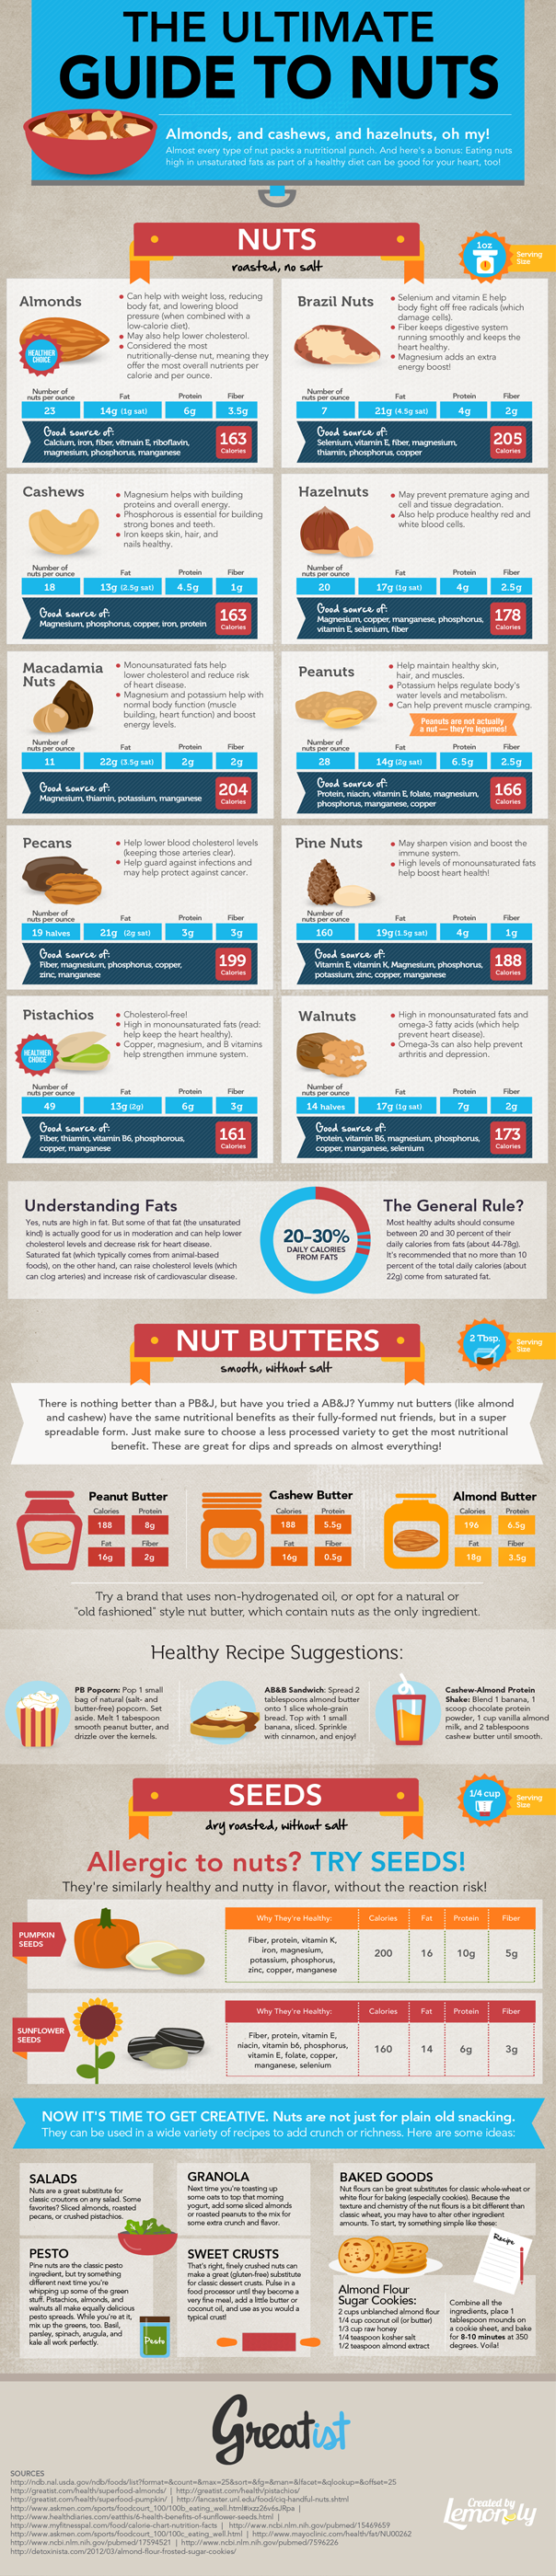 The ultimate guide to nuts infographic